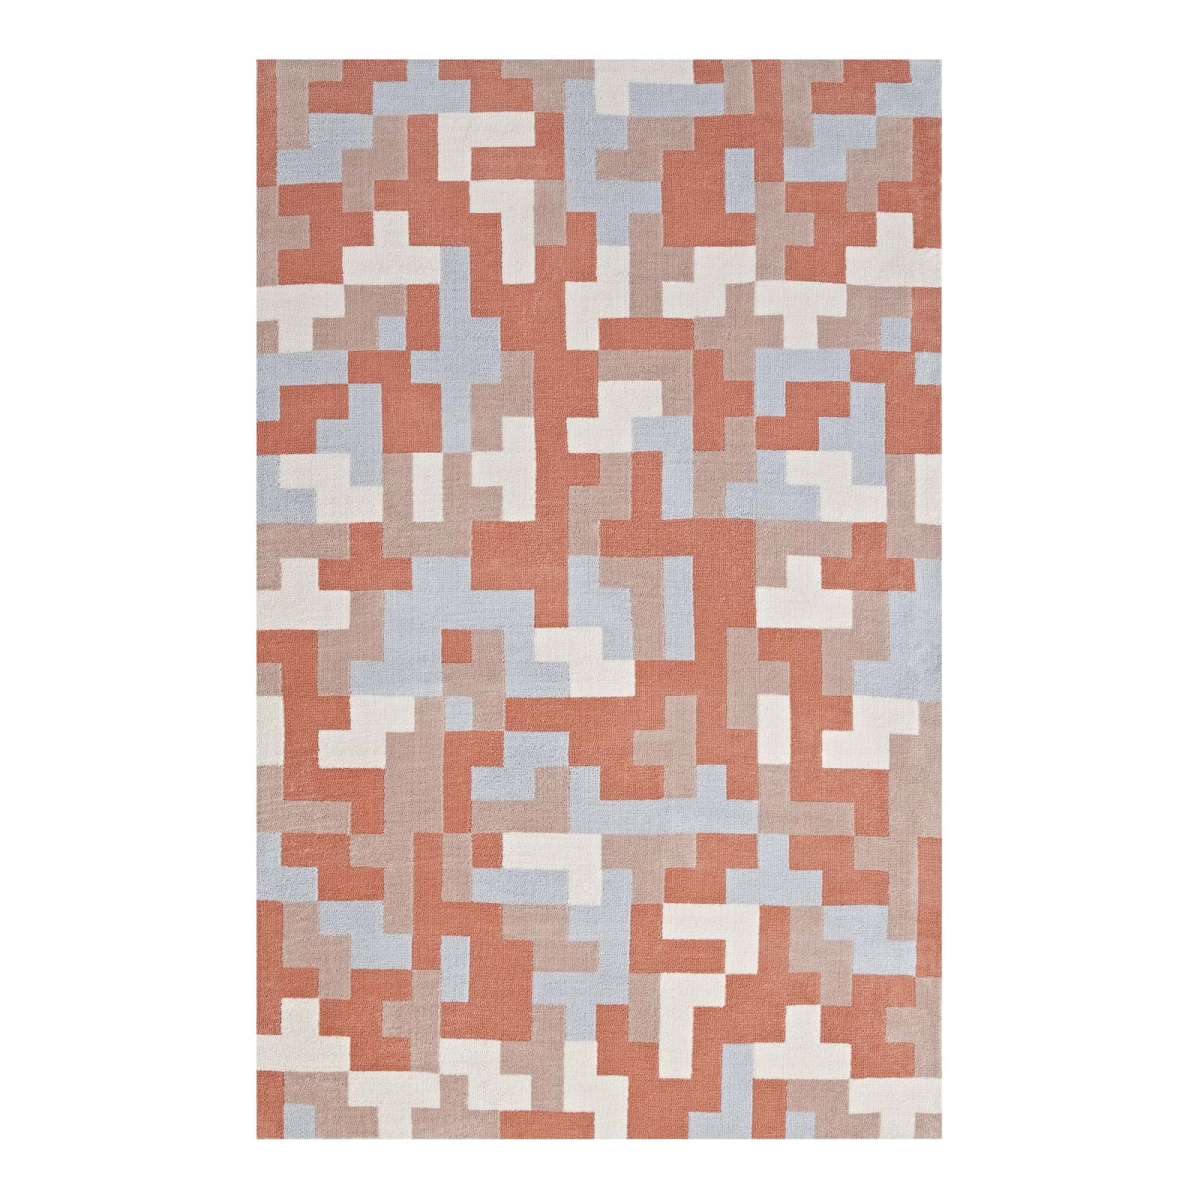 R-1022b-58 5 X 8 Ft. Andela Interlocking Block Mosaic Polyester Area Rug - Multicolored Coral & Light Blue, 0.5 X 60 X 96 In.